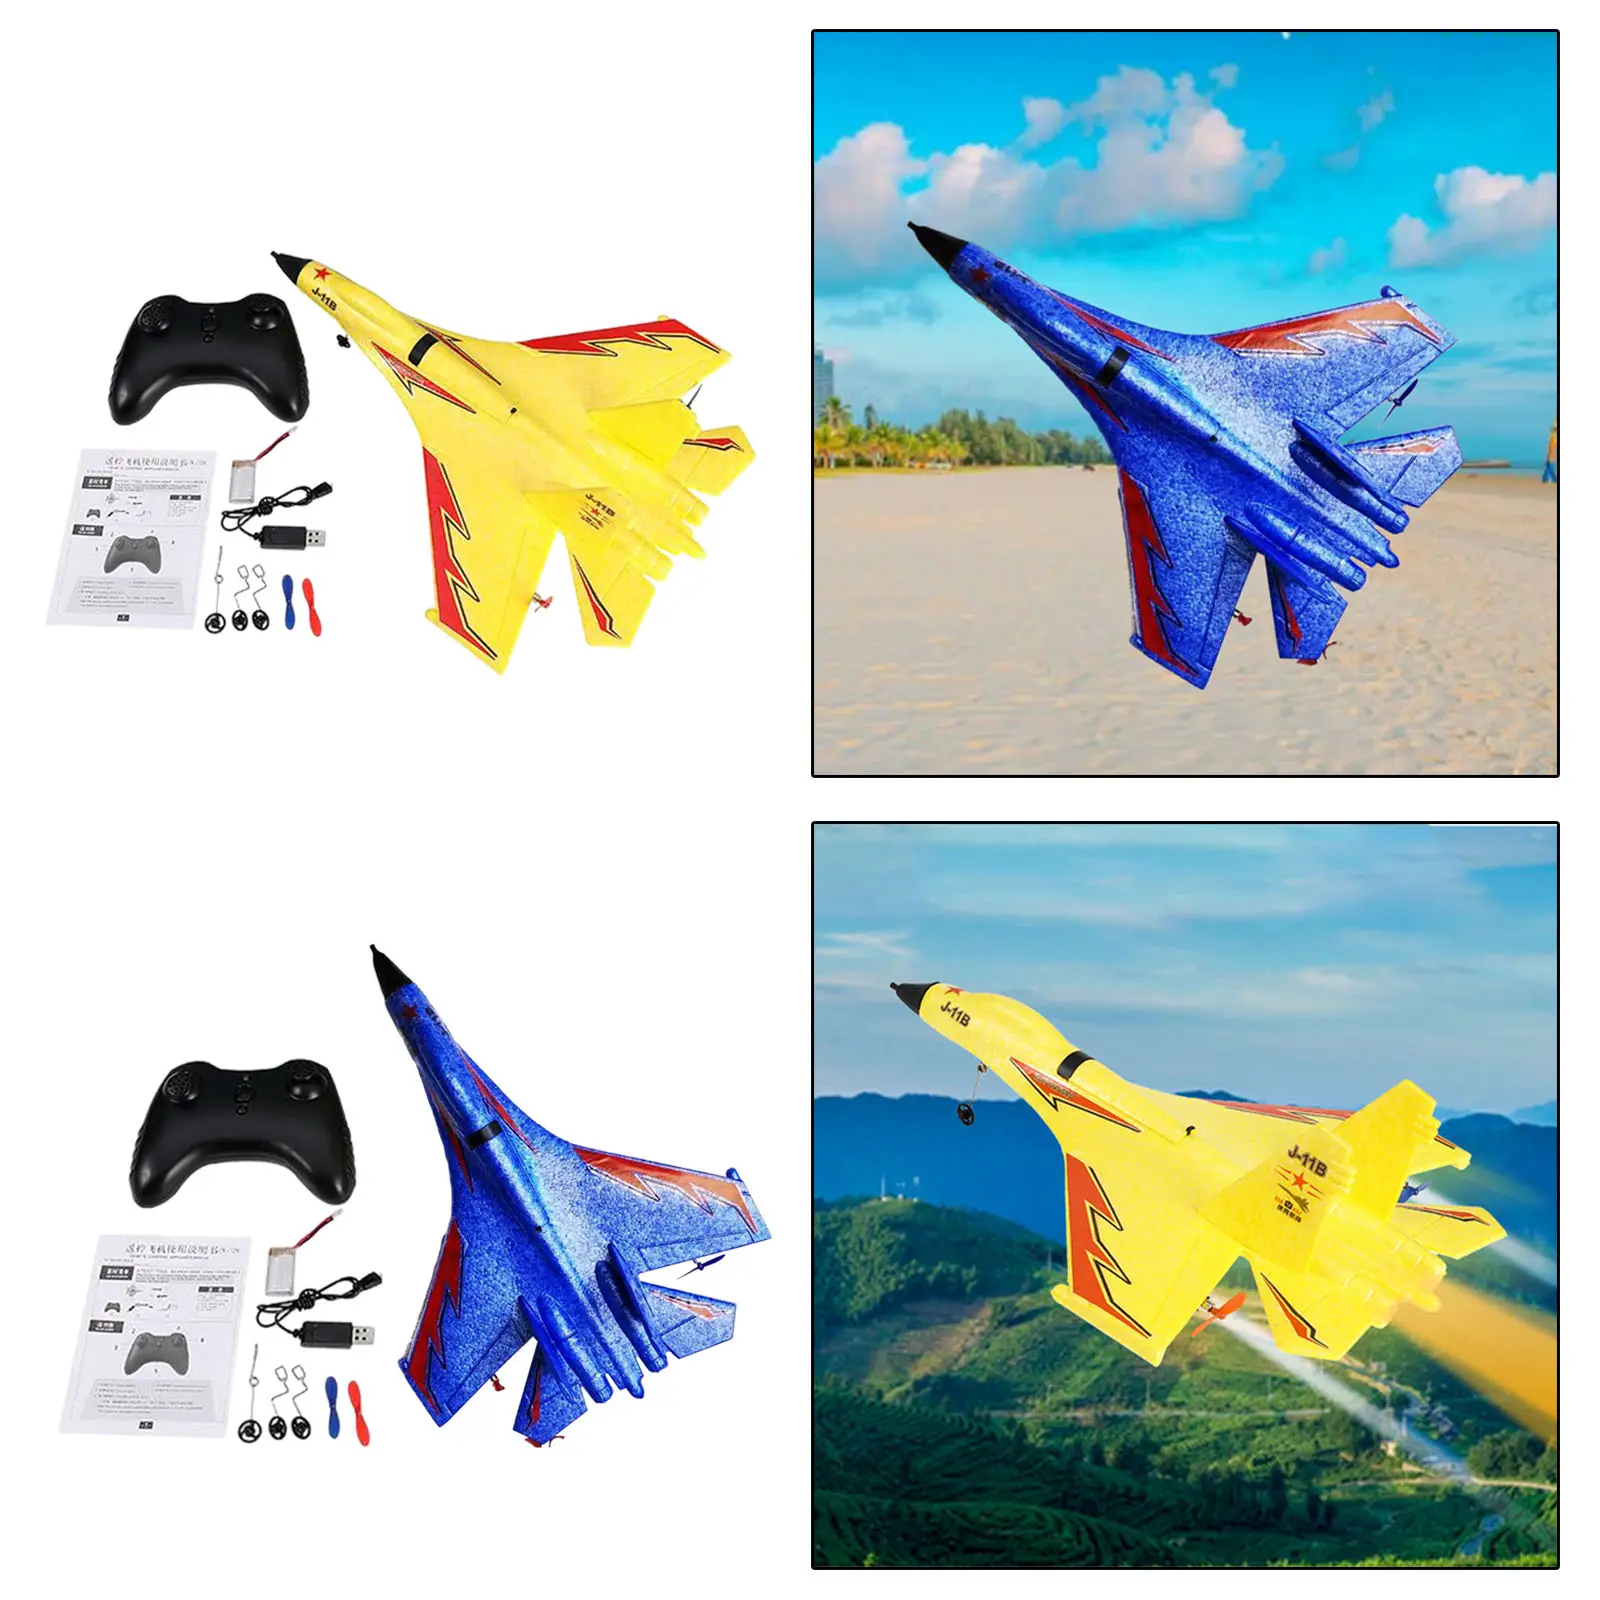 3 Channel RC Airplane Cool Lights J-11B Rtf Model with Gyro Lightweight Foam RC Glider Toy RC Plane for Xmas Present Sport Gifts